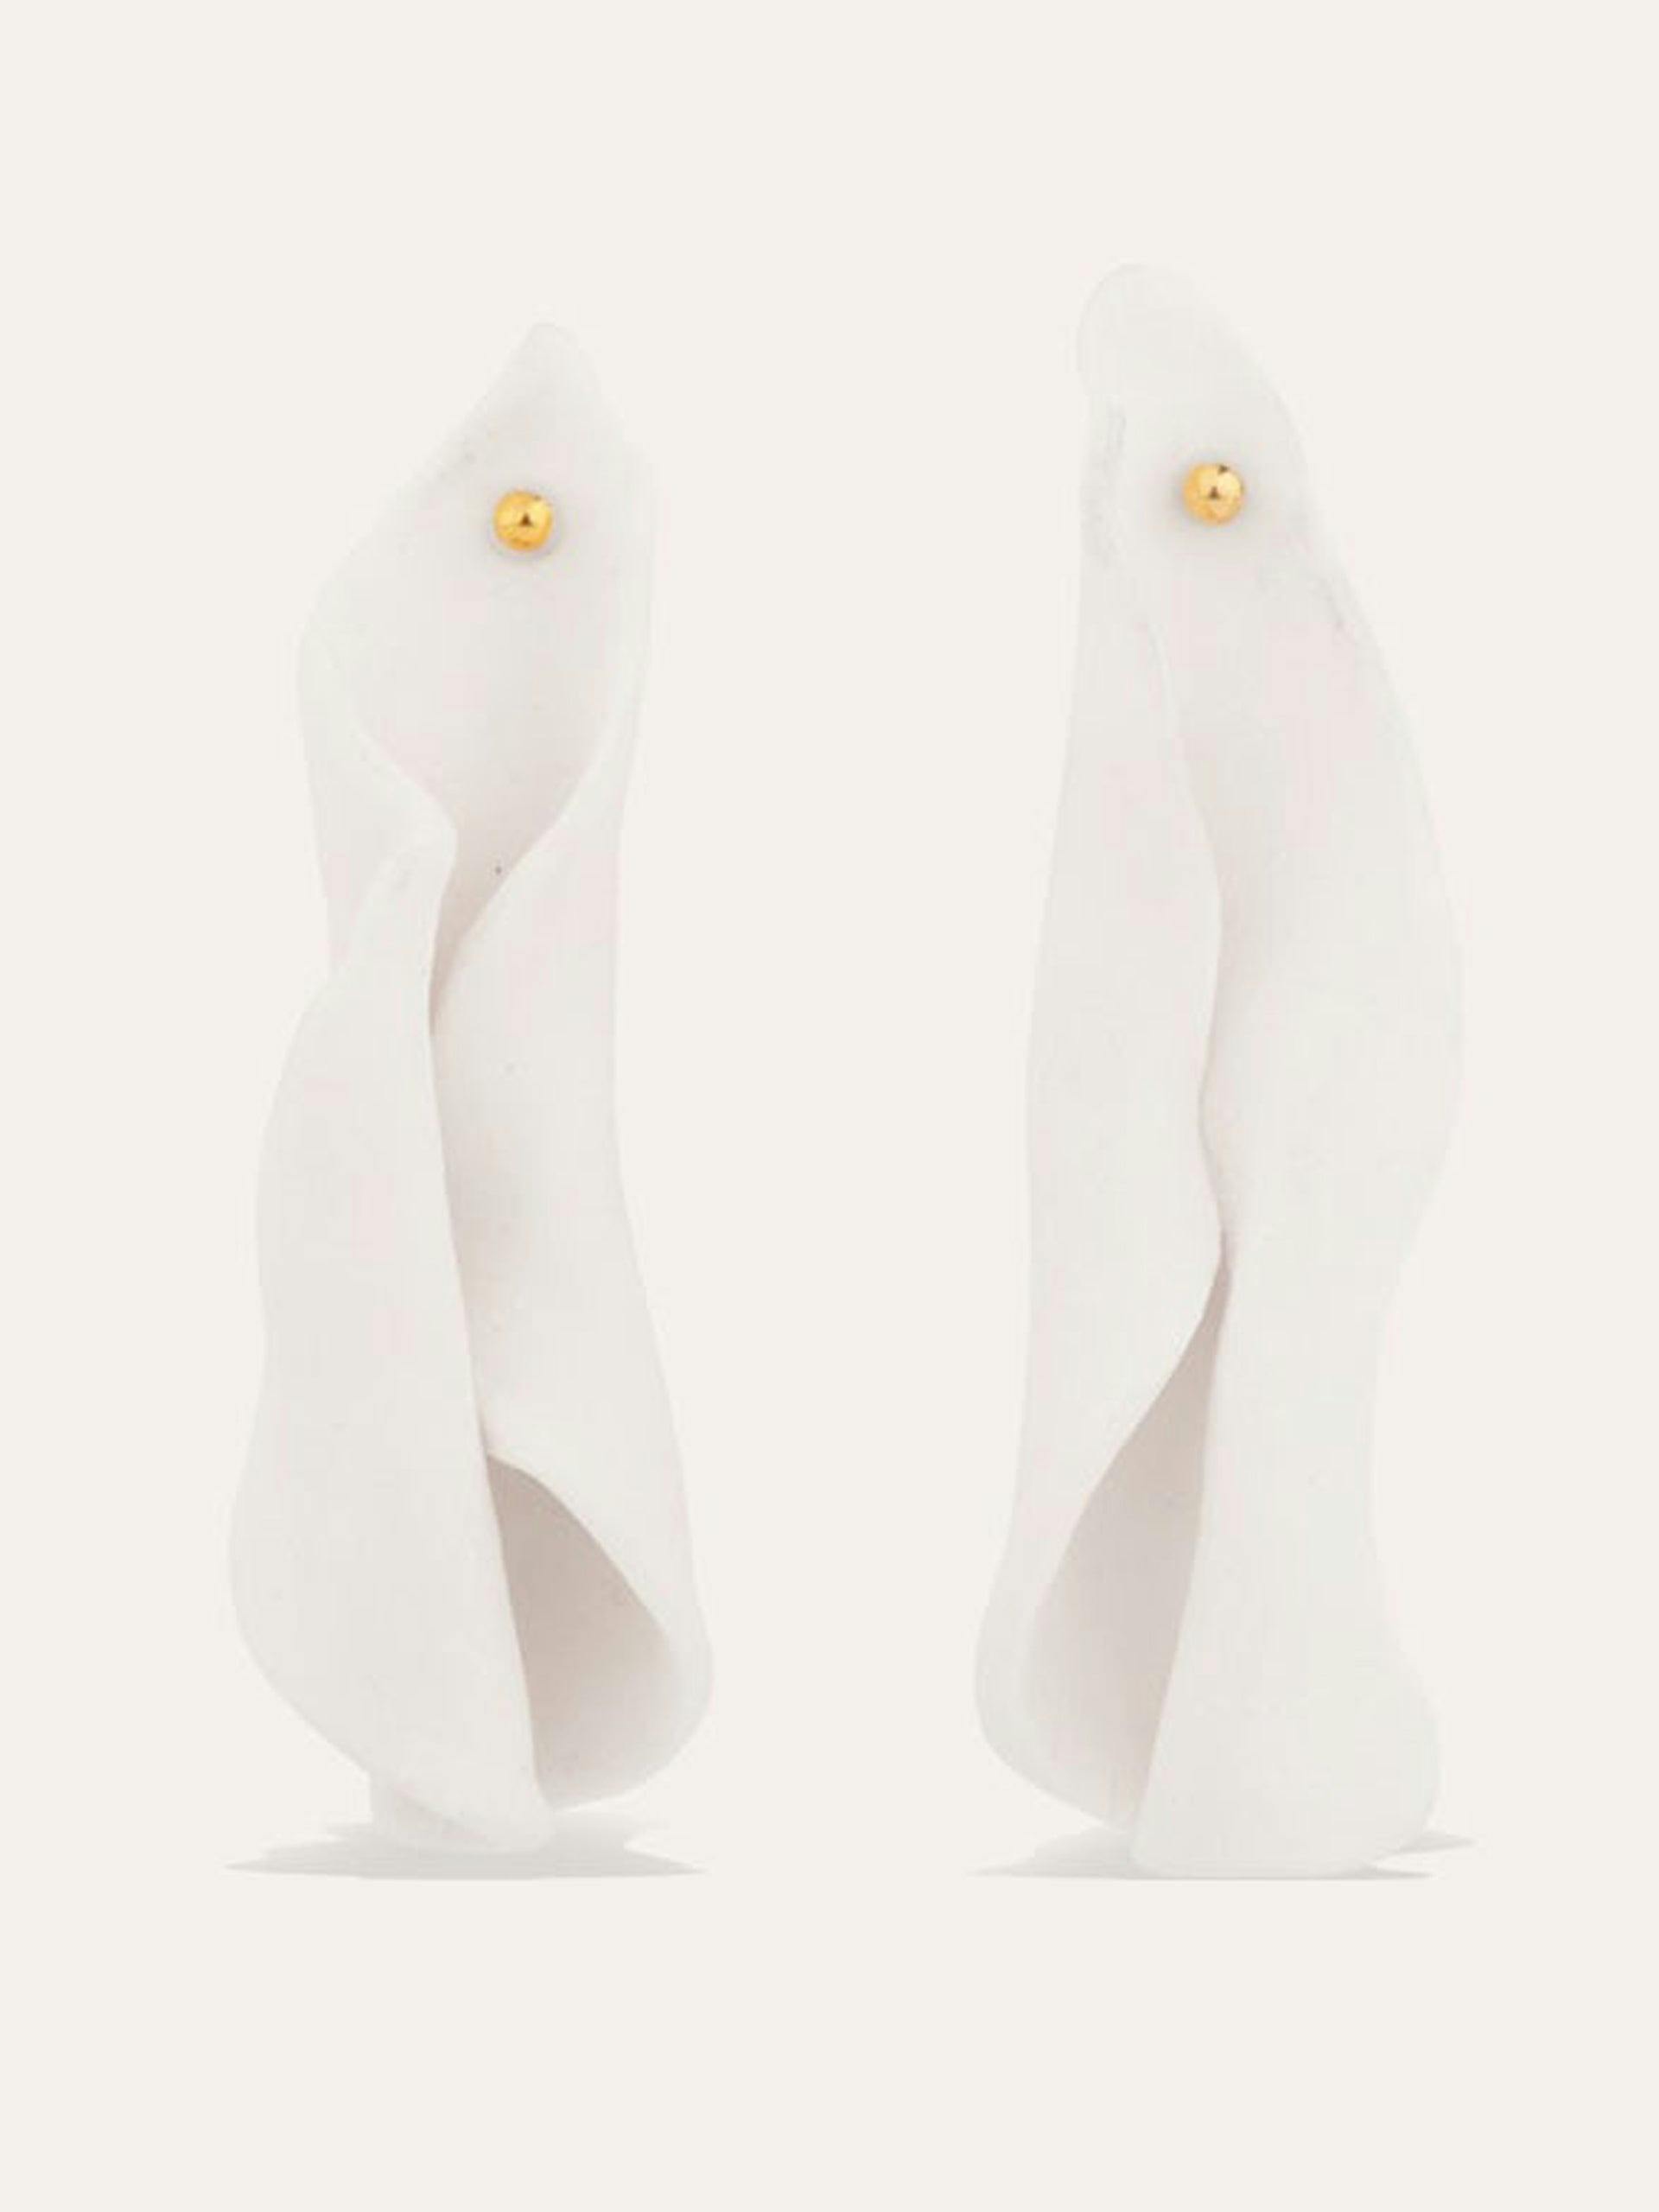 "Suspended Forms" gold vermeil and ceramic earrings